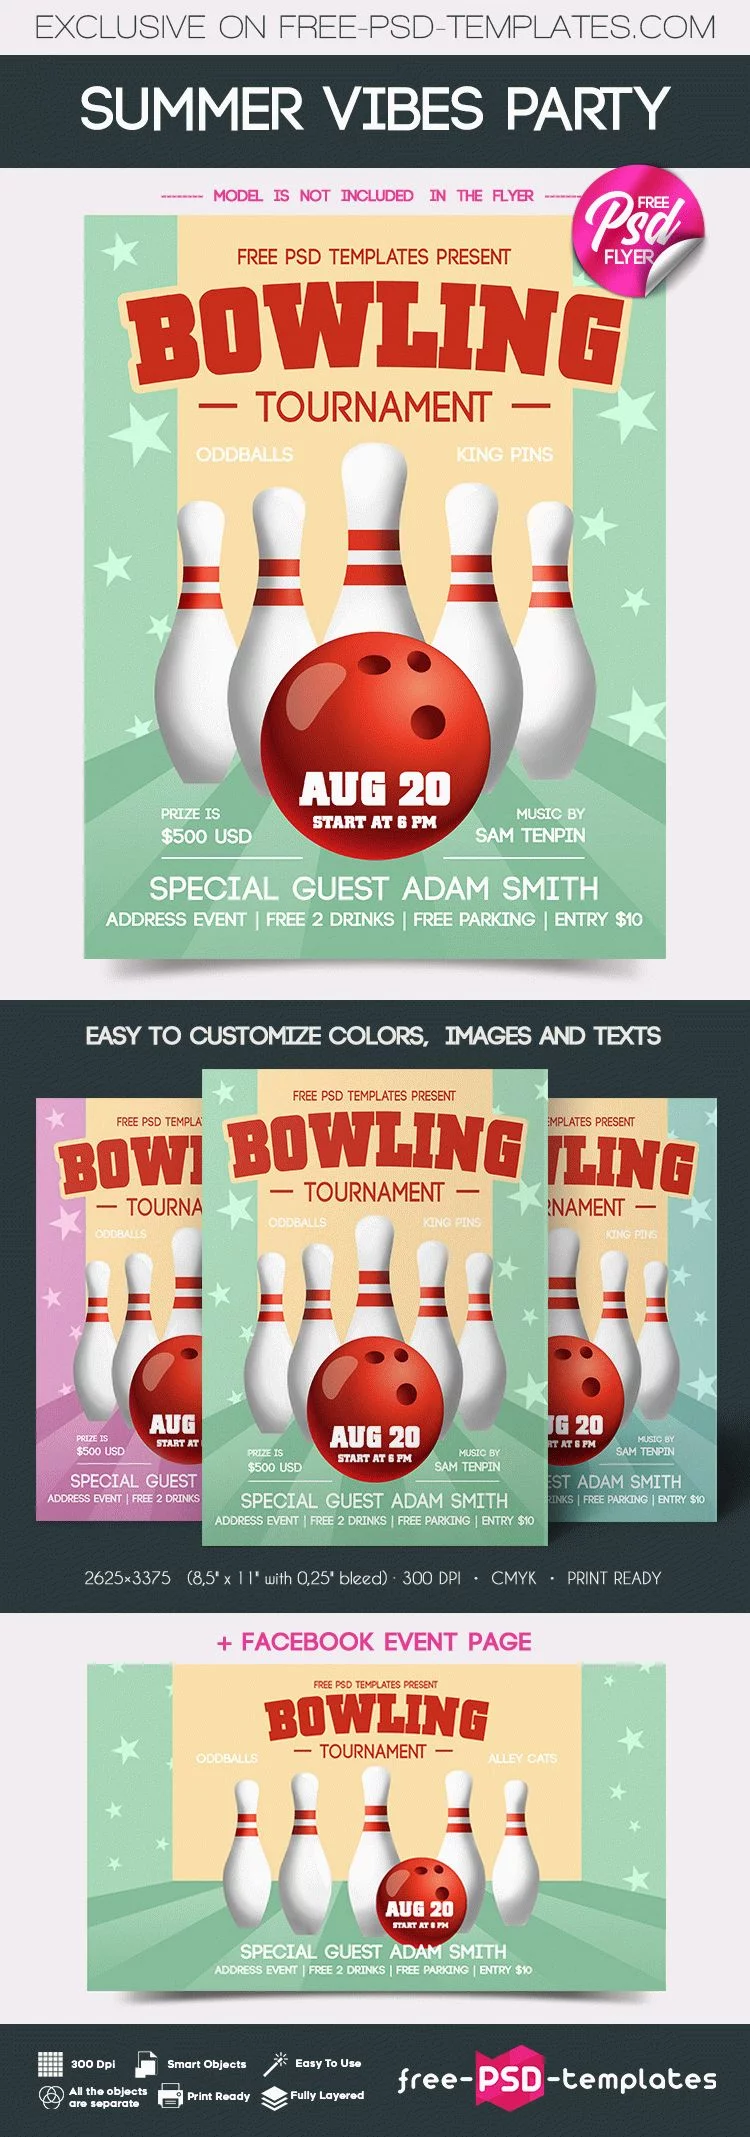 Free Bowling Tournament Flyer in PSD